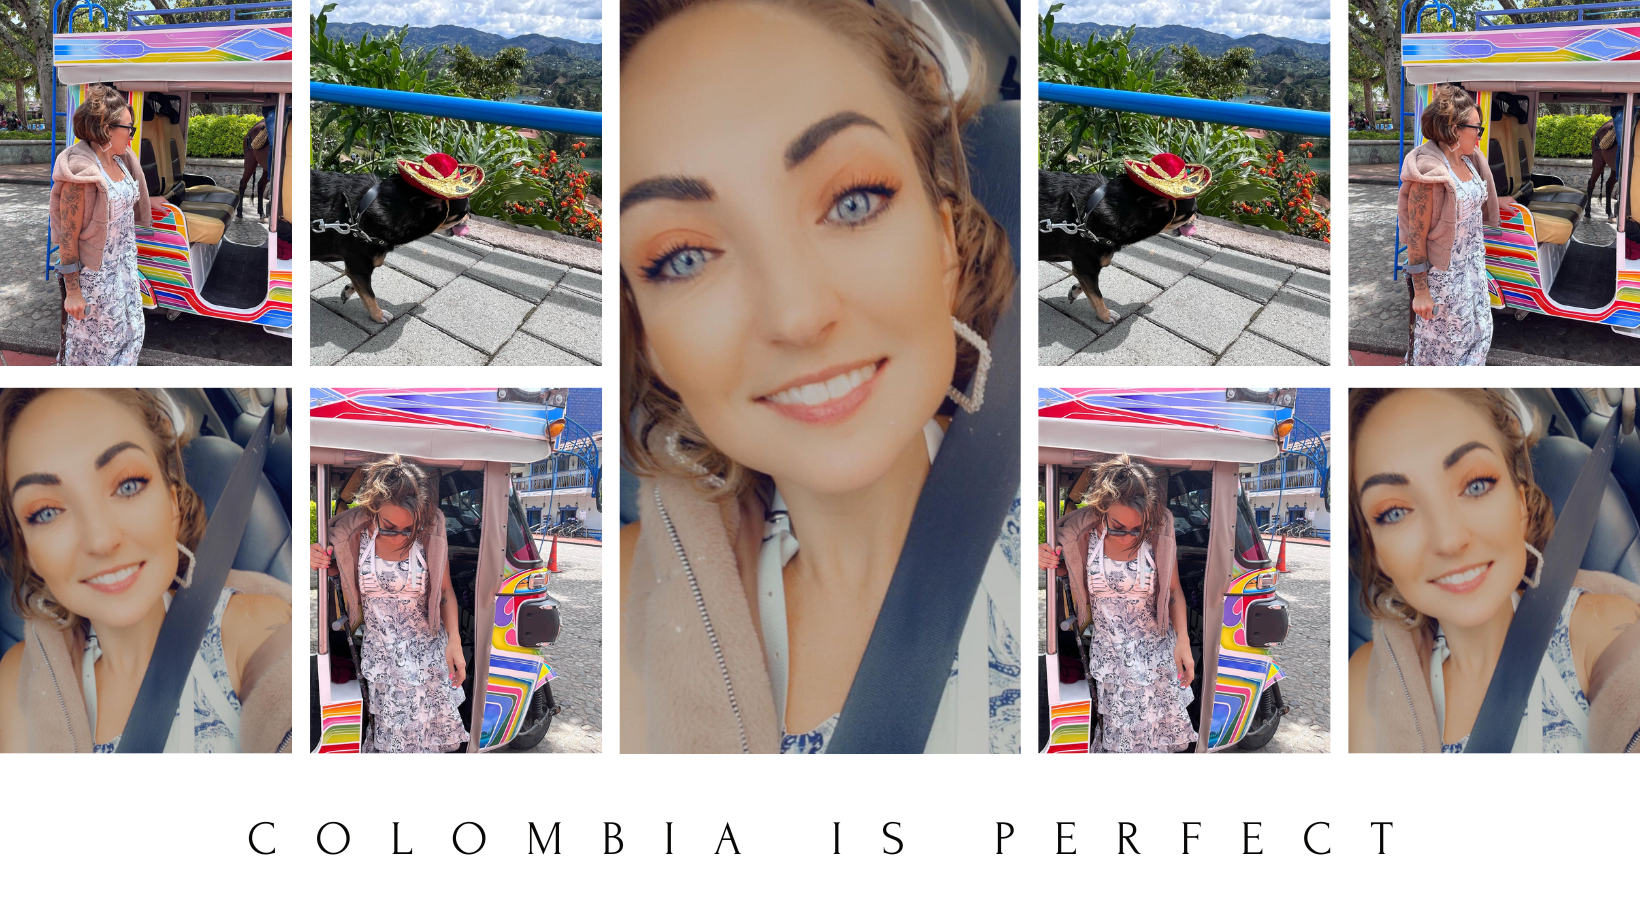 colombia travel